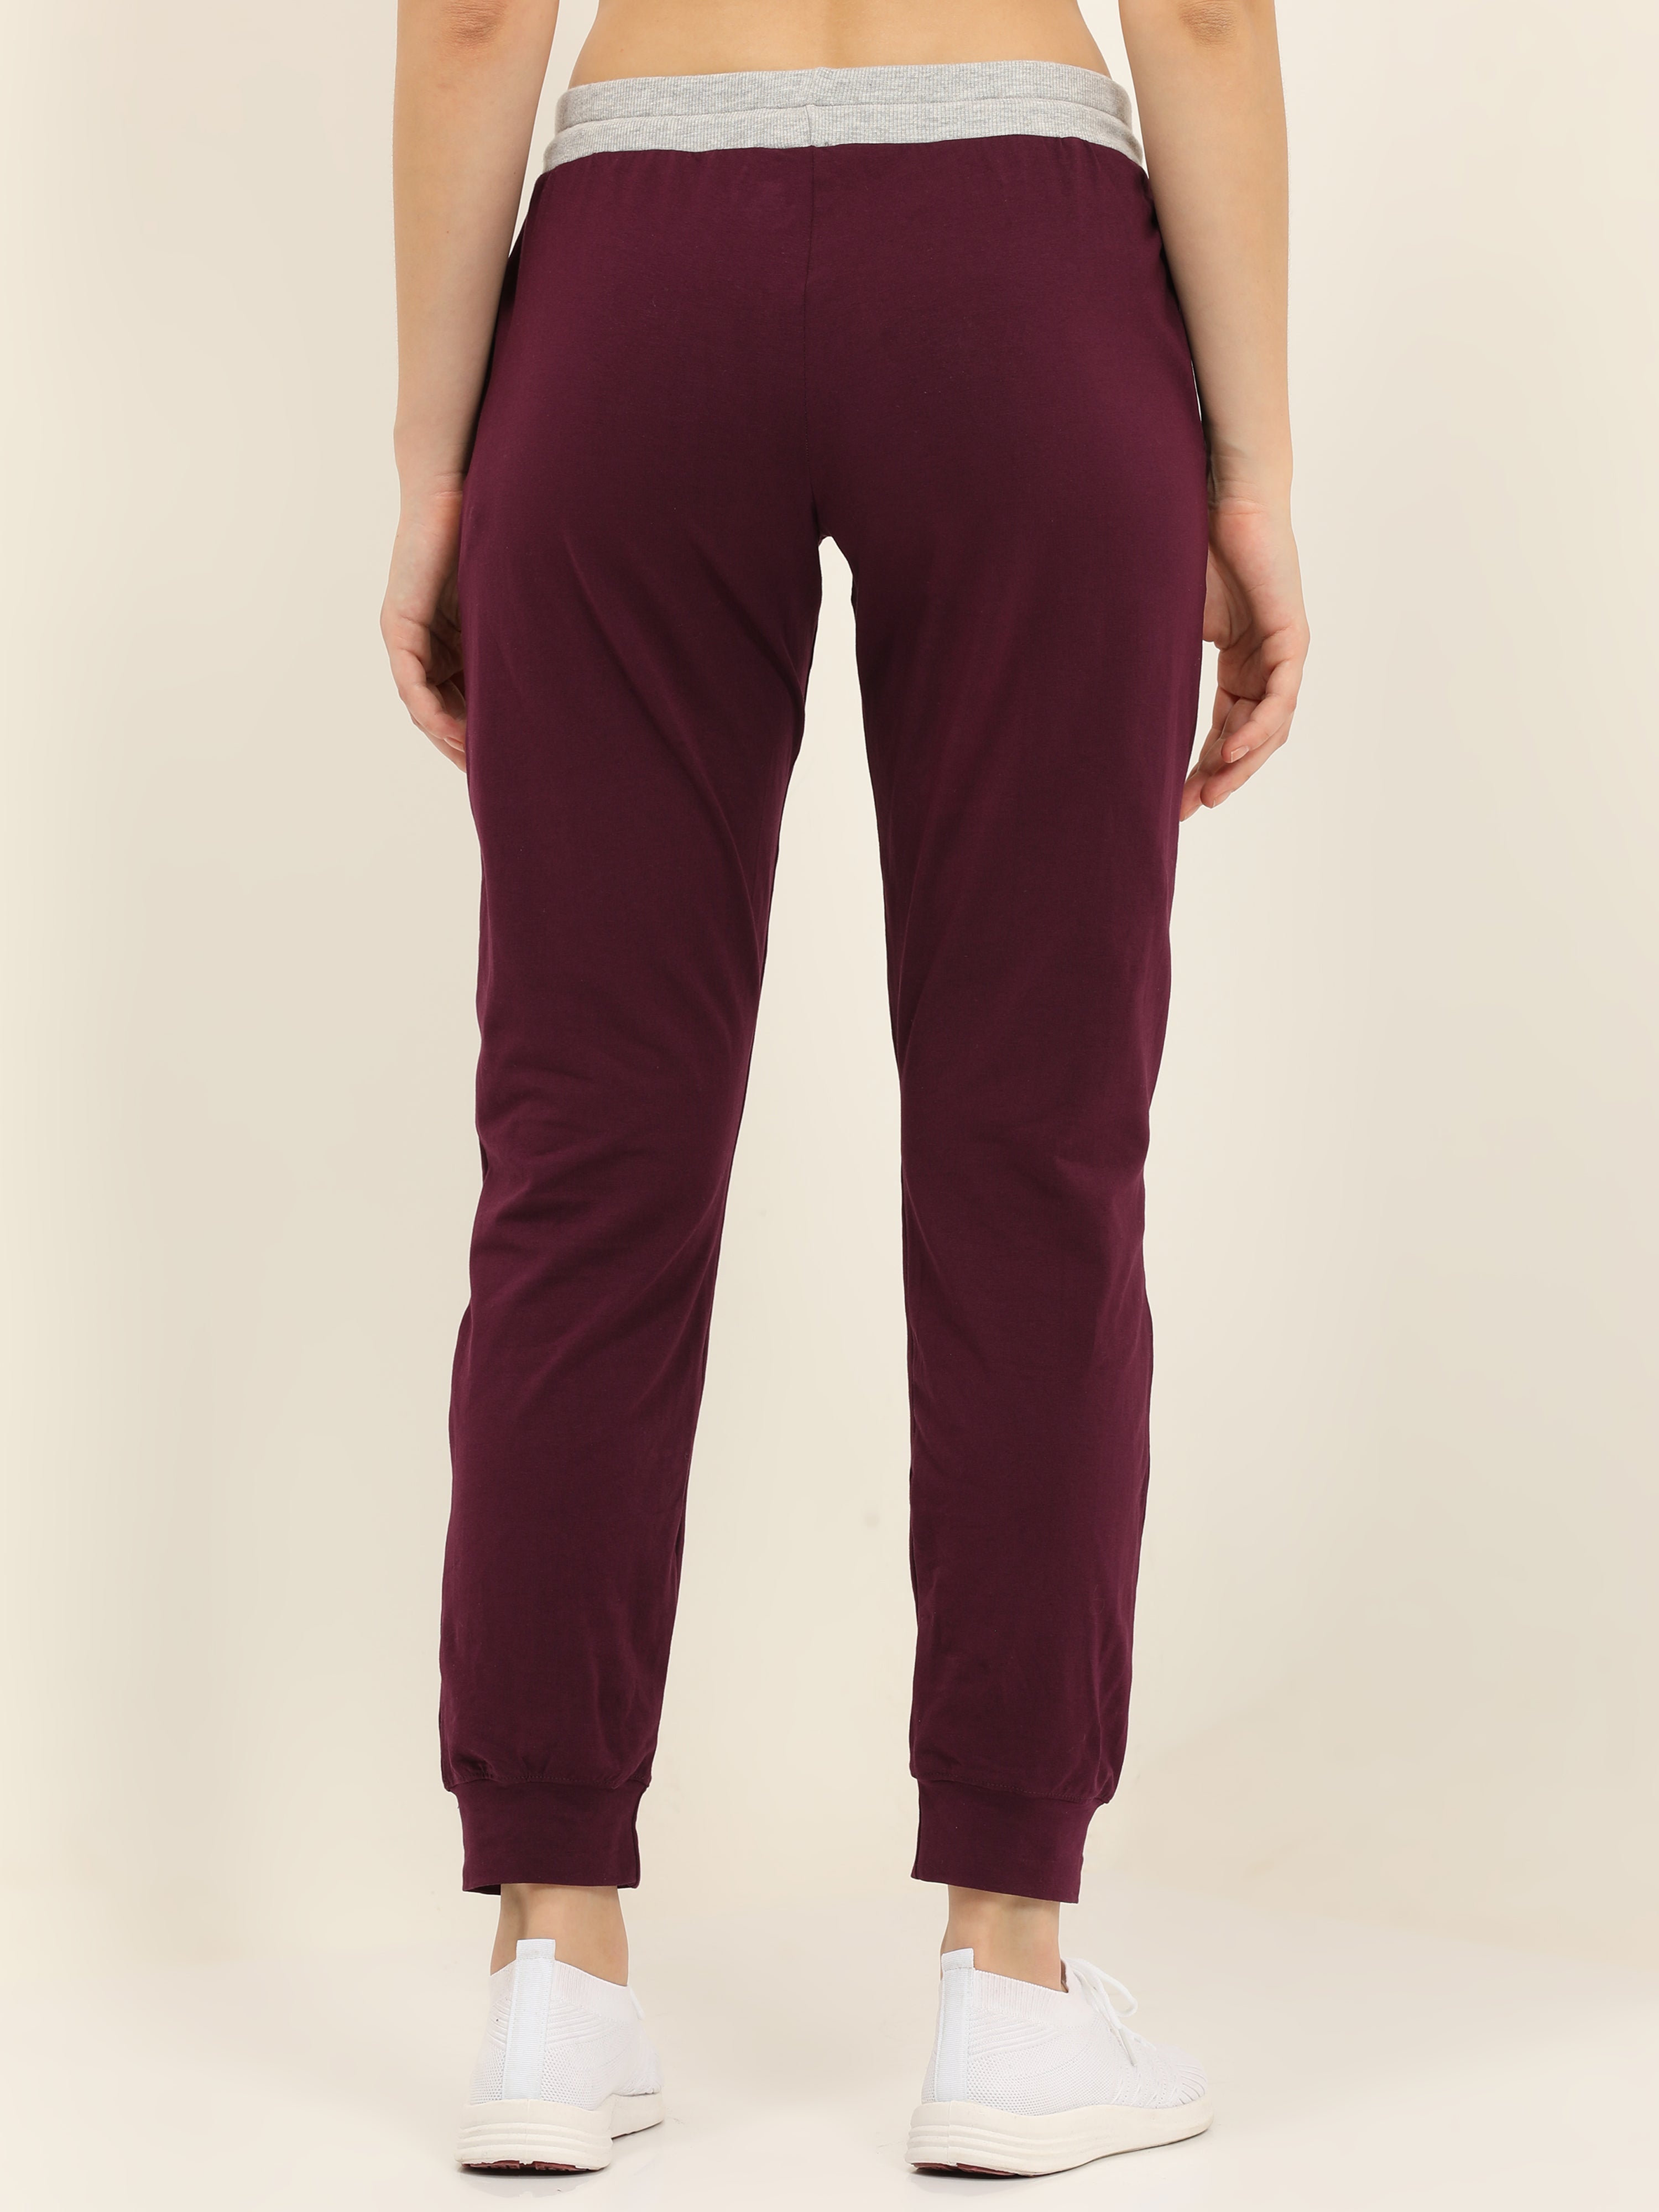 Gregory Modal Jogger Pant - Contemporary Modern Athleisure Pants